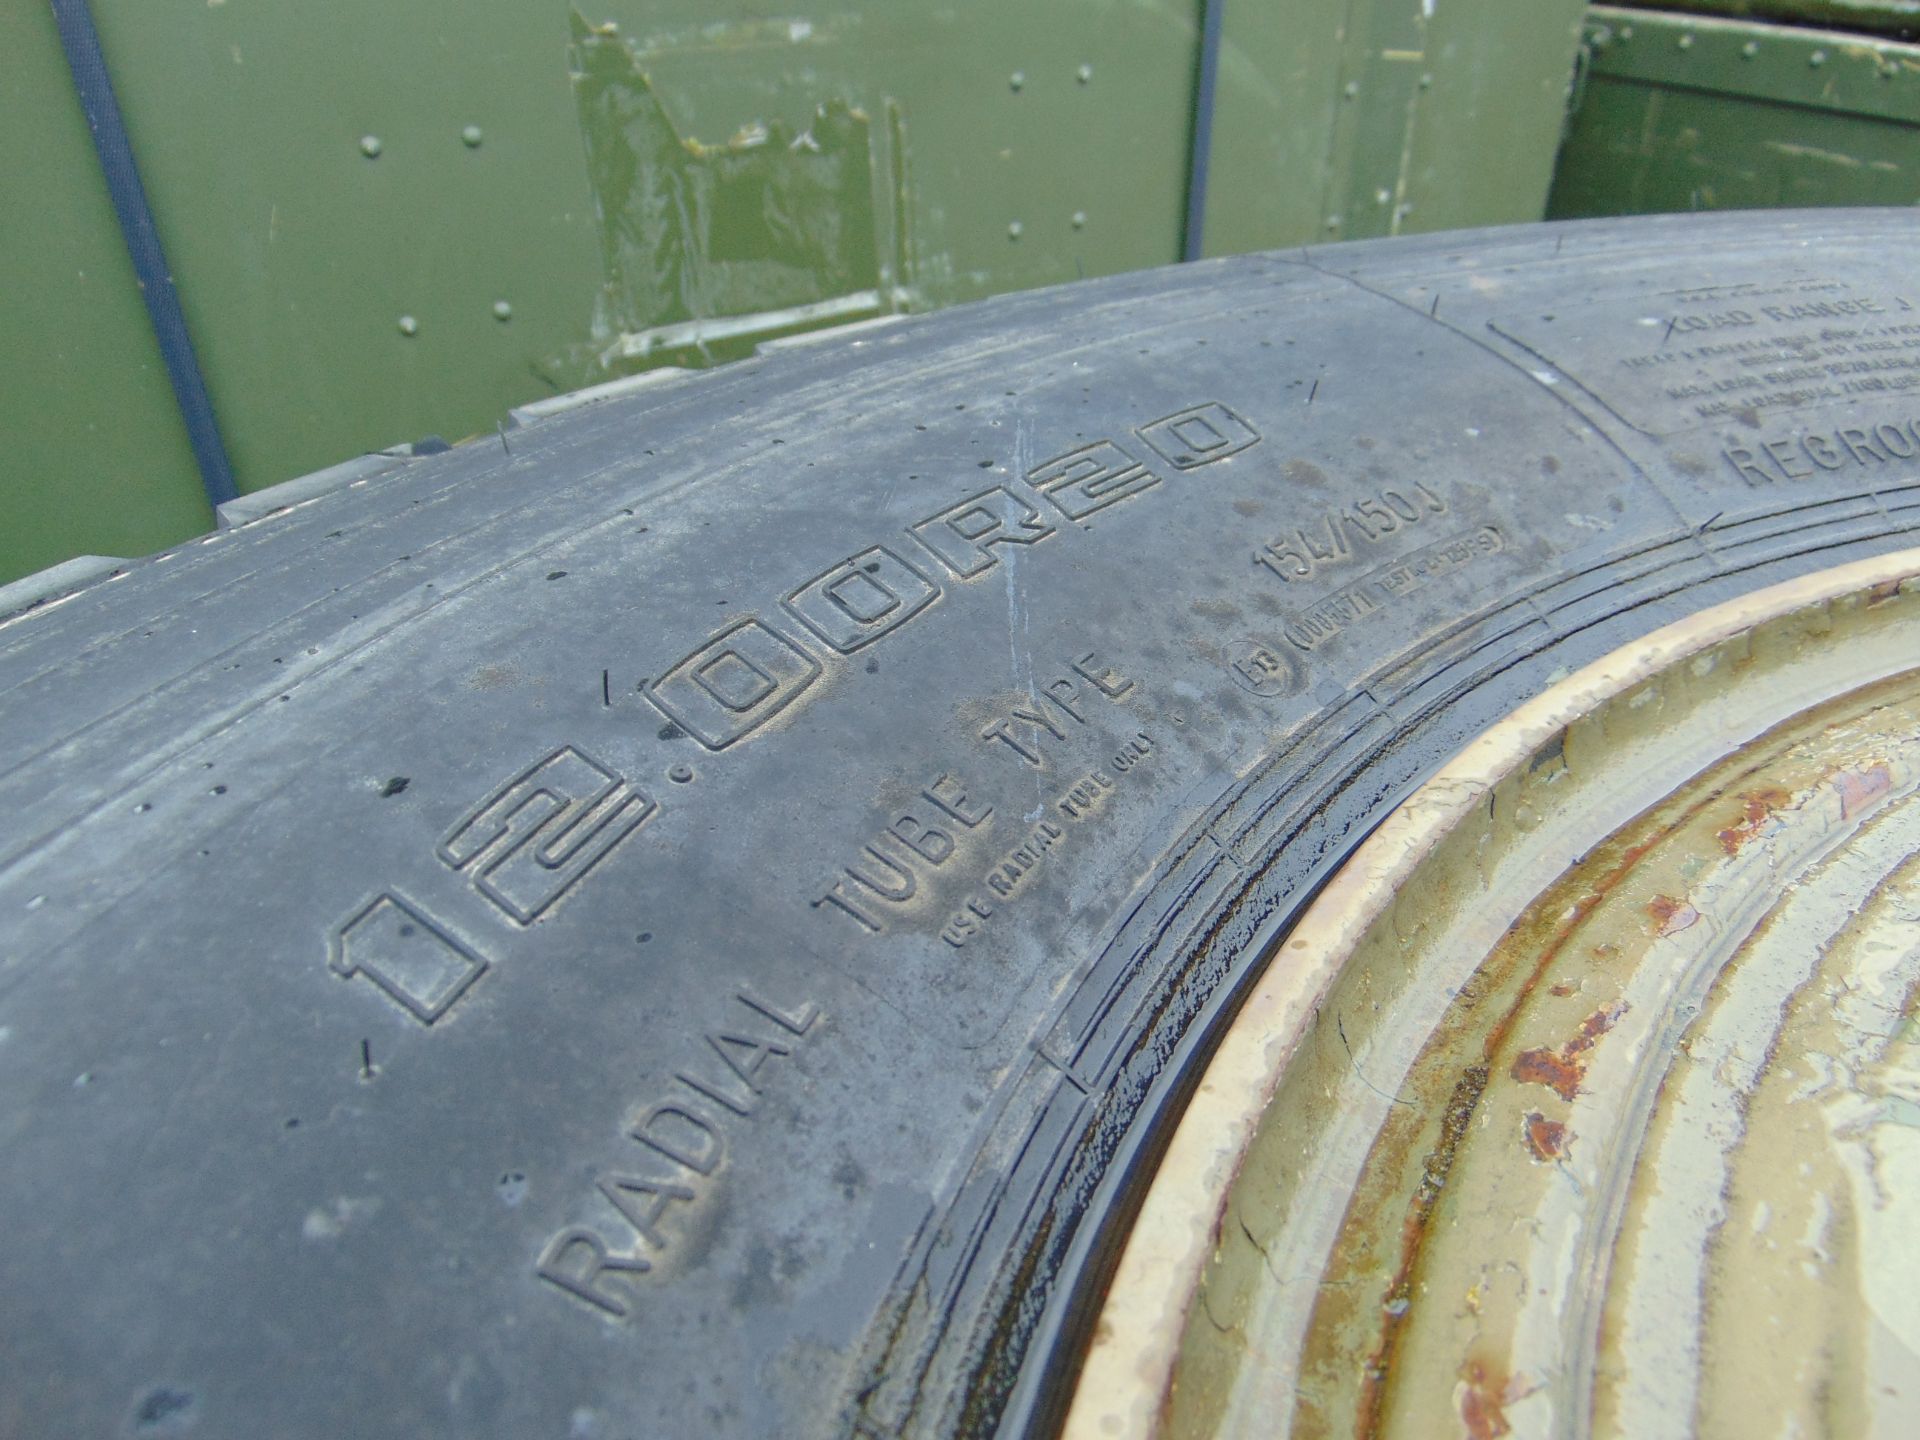 Qty 4 x Goodyear 12.00R20 G388 Unisteel tyres, unused still with bobbles fitted on 8 stud rims - Image 9 of 9